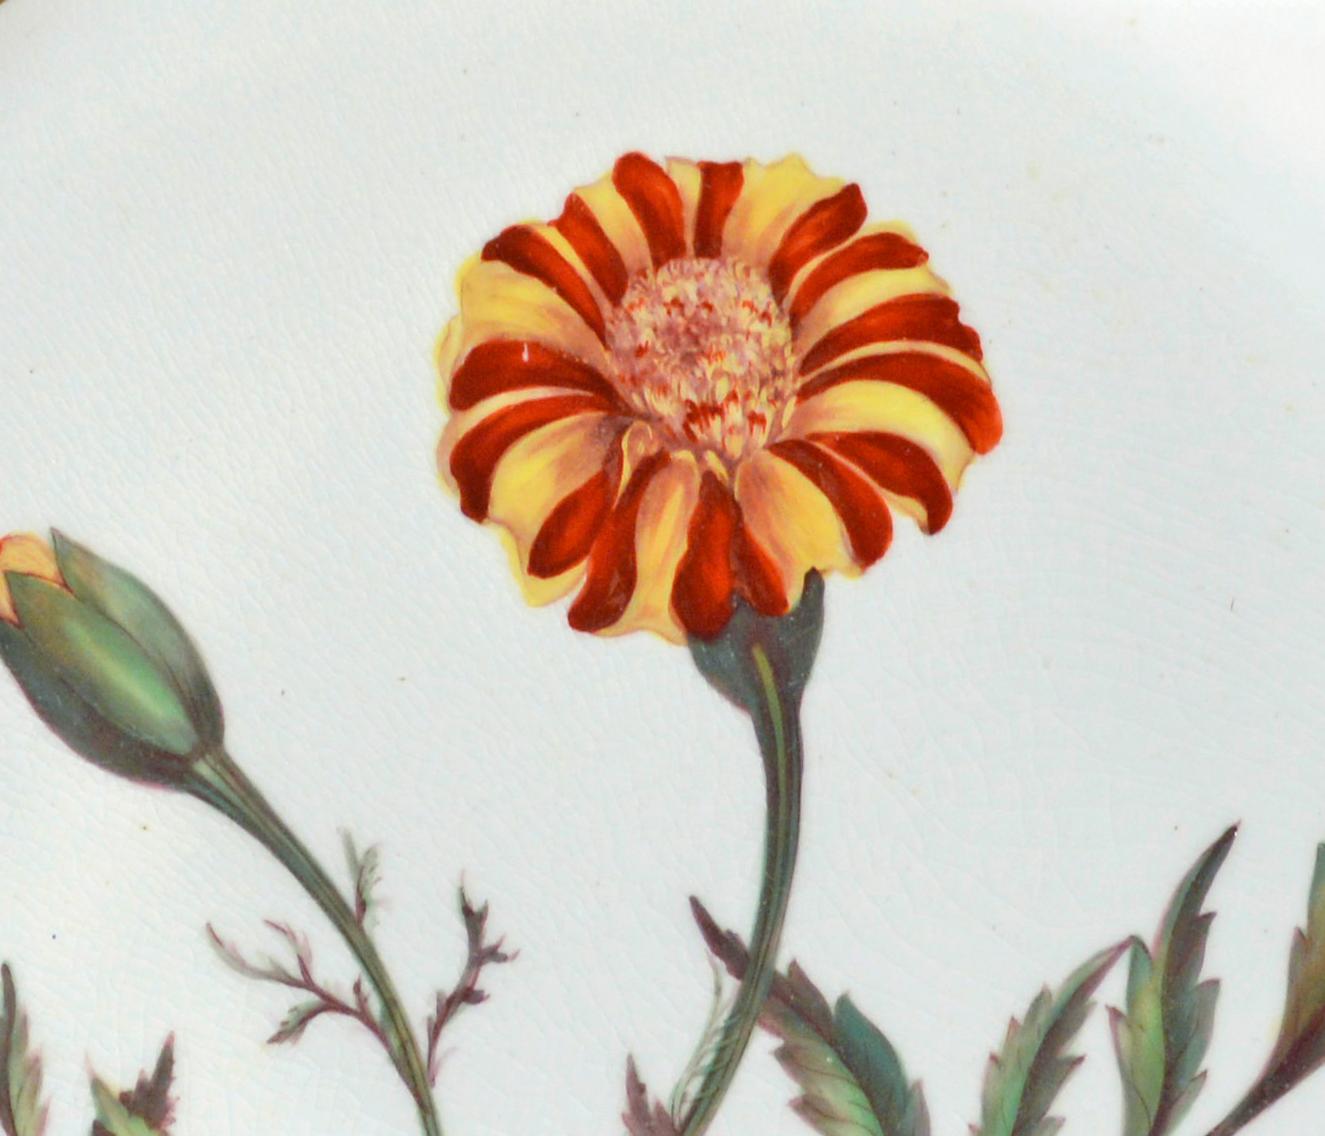 Antique Derby Porcelain Botanical Salmon-ground Plate,
French Marigold,
by John Brewer,
Circa 1815.

The Derby porcelain plate is boldly painted with a French Marigold botanical specimen with richly gilded borders with swans and stylized